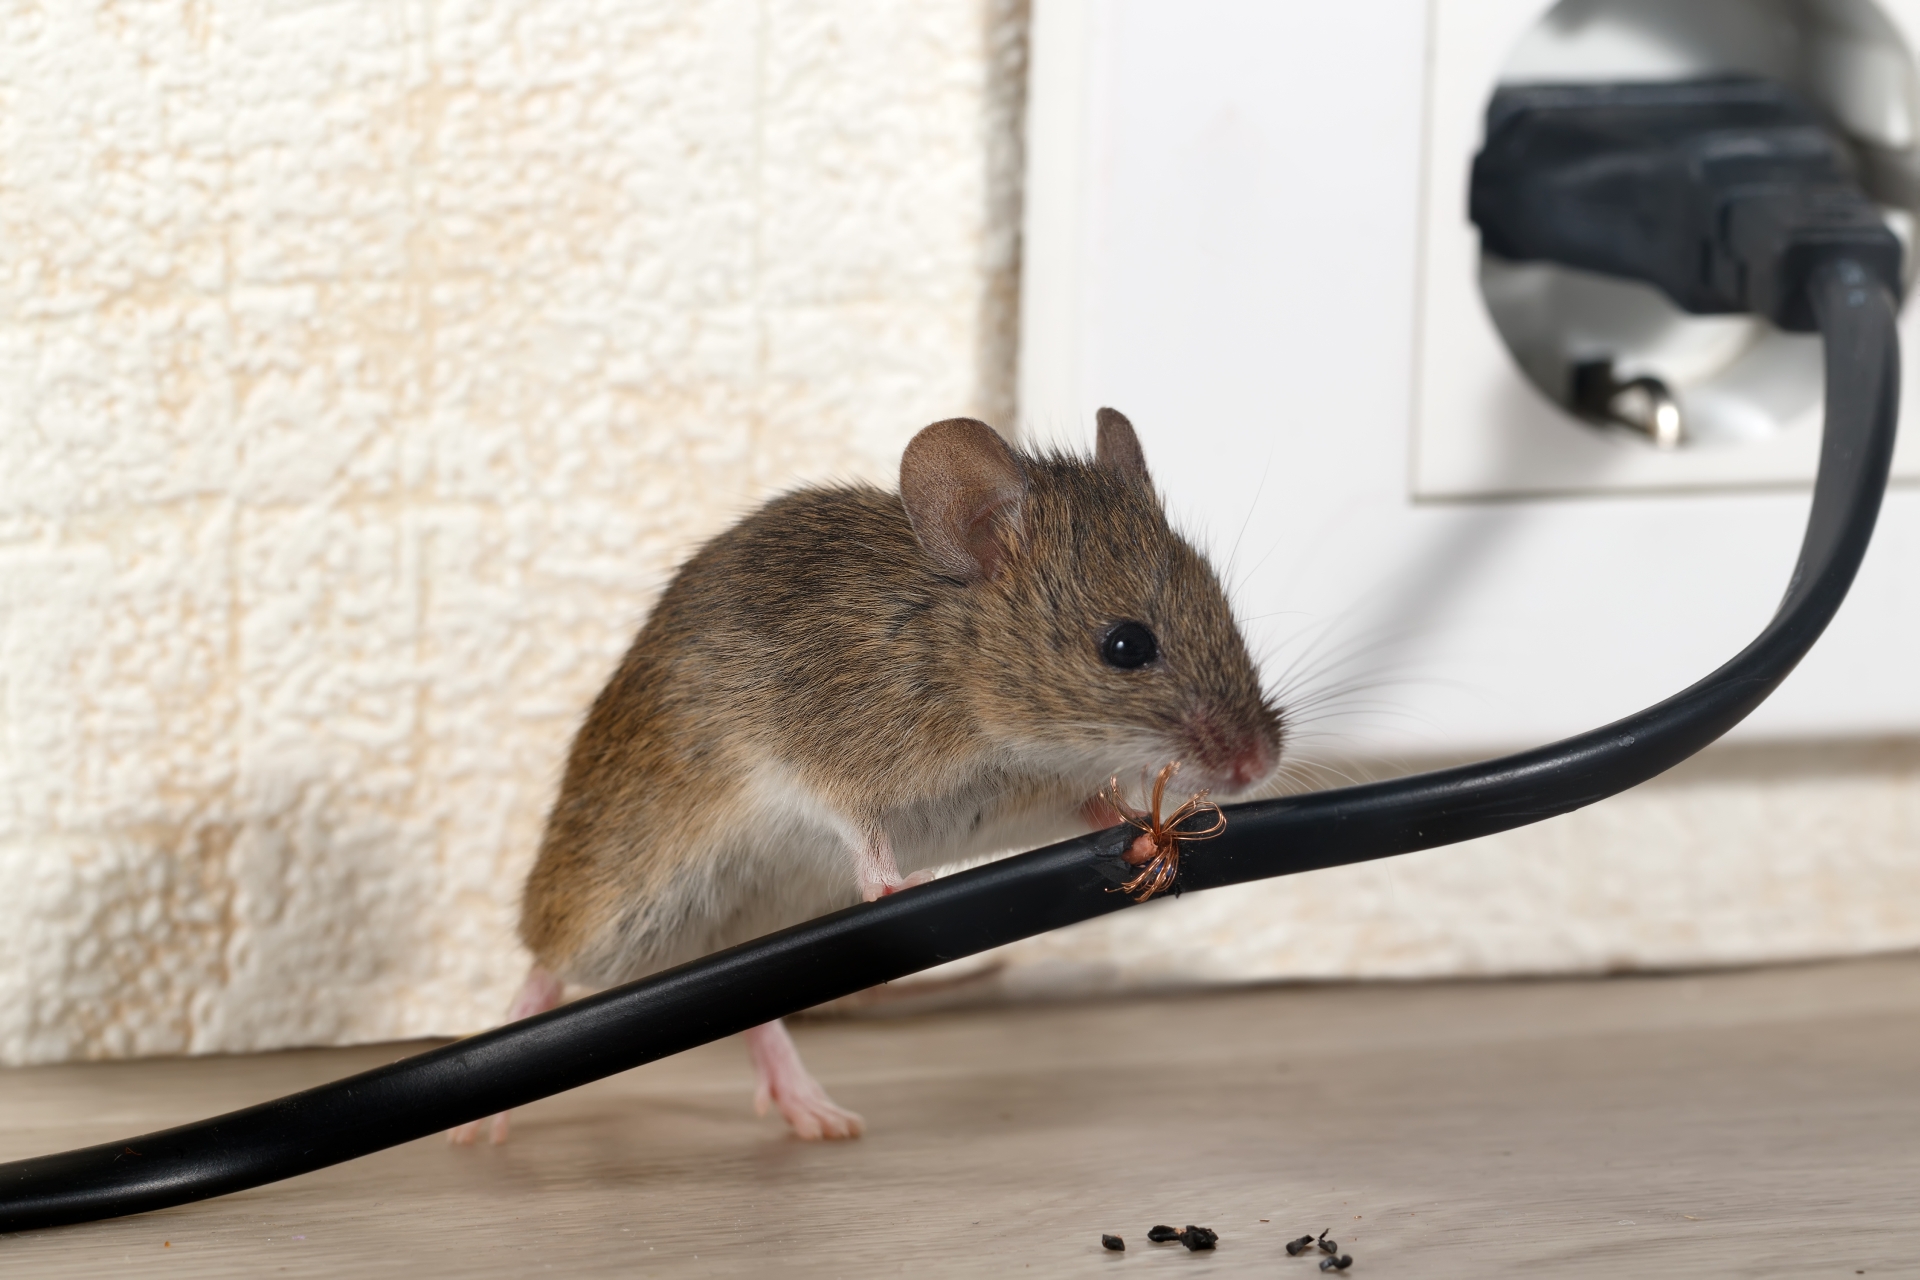 Mice Infestation, Pest Control in East Ham, Beckton, E6. Call Now 020 8166 9746